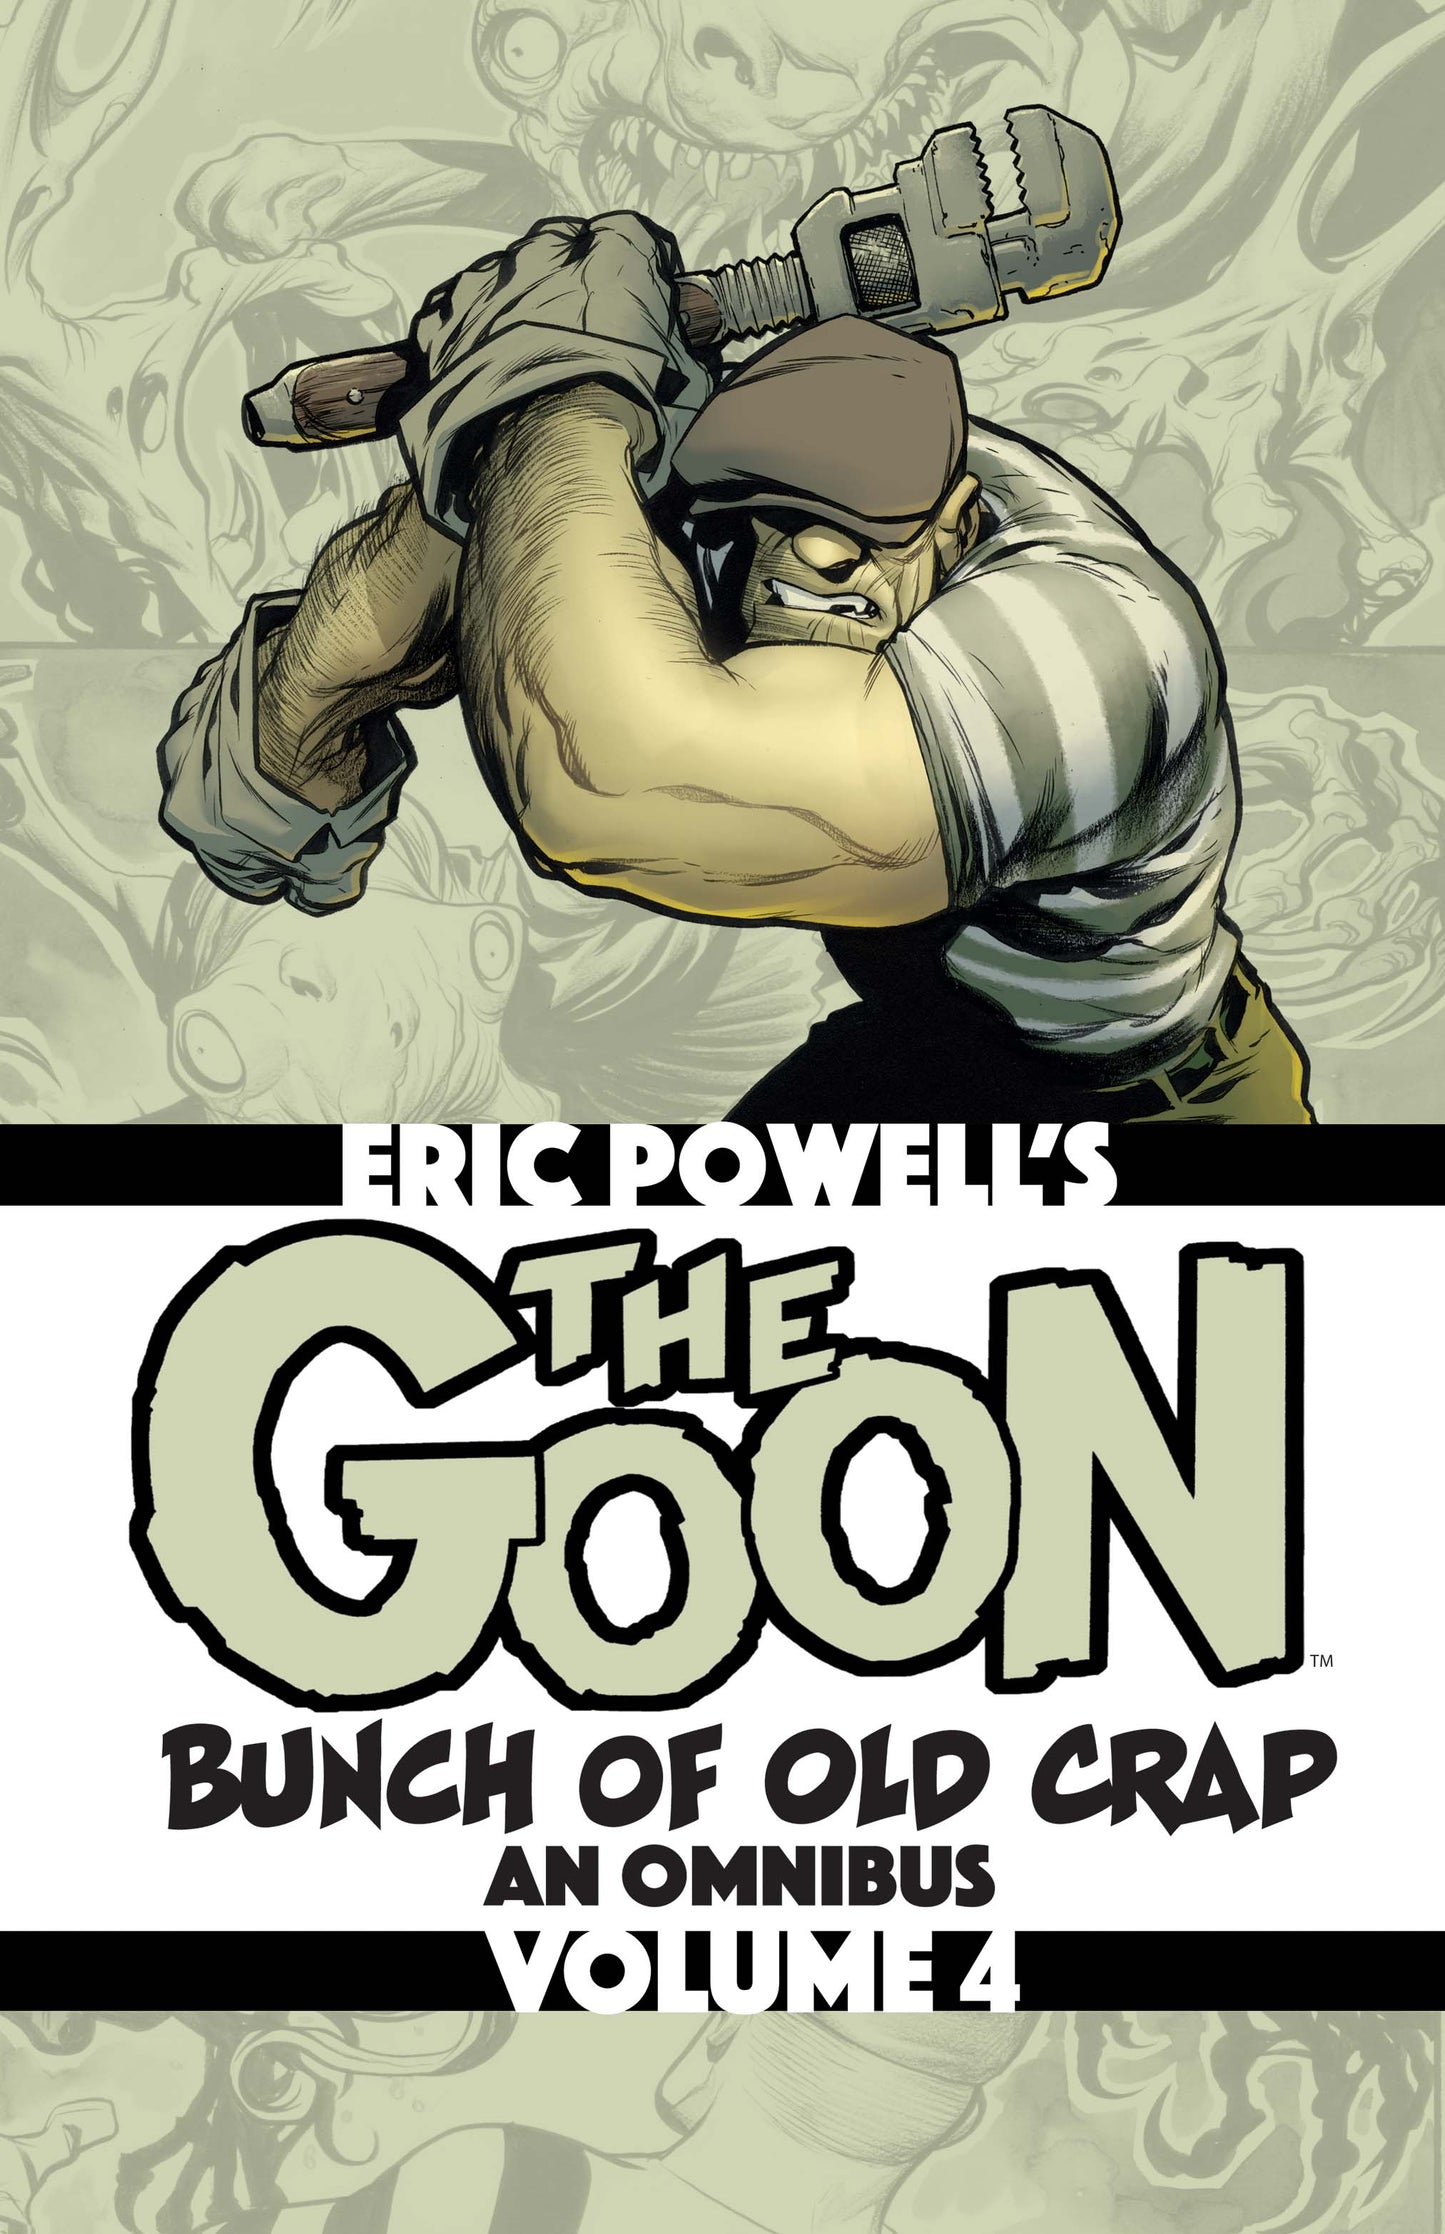 The Goon Bunch of Old Crap an Omnibus Volume 4